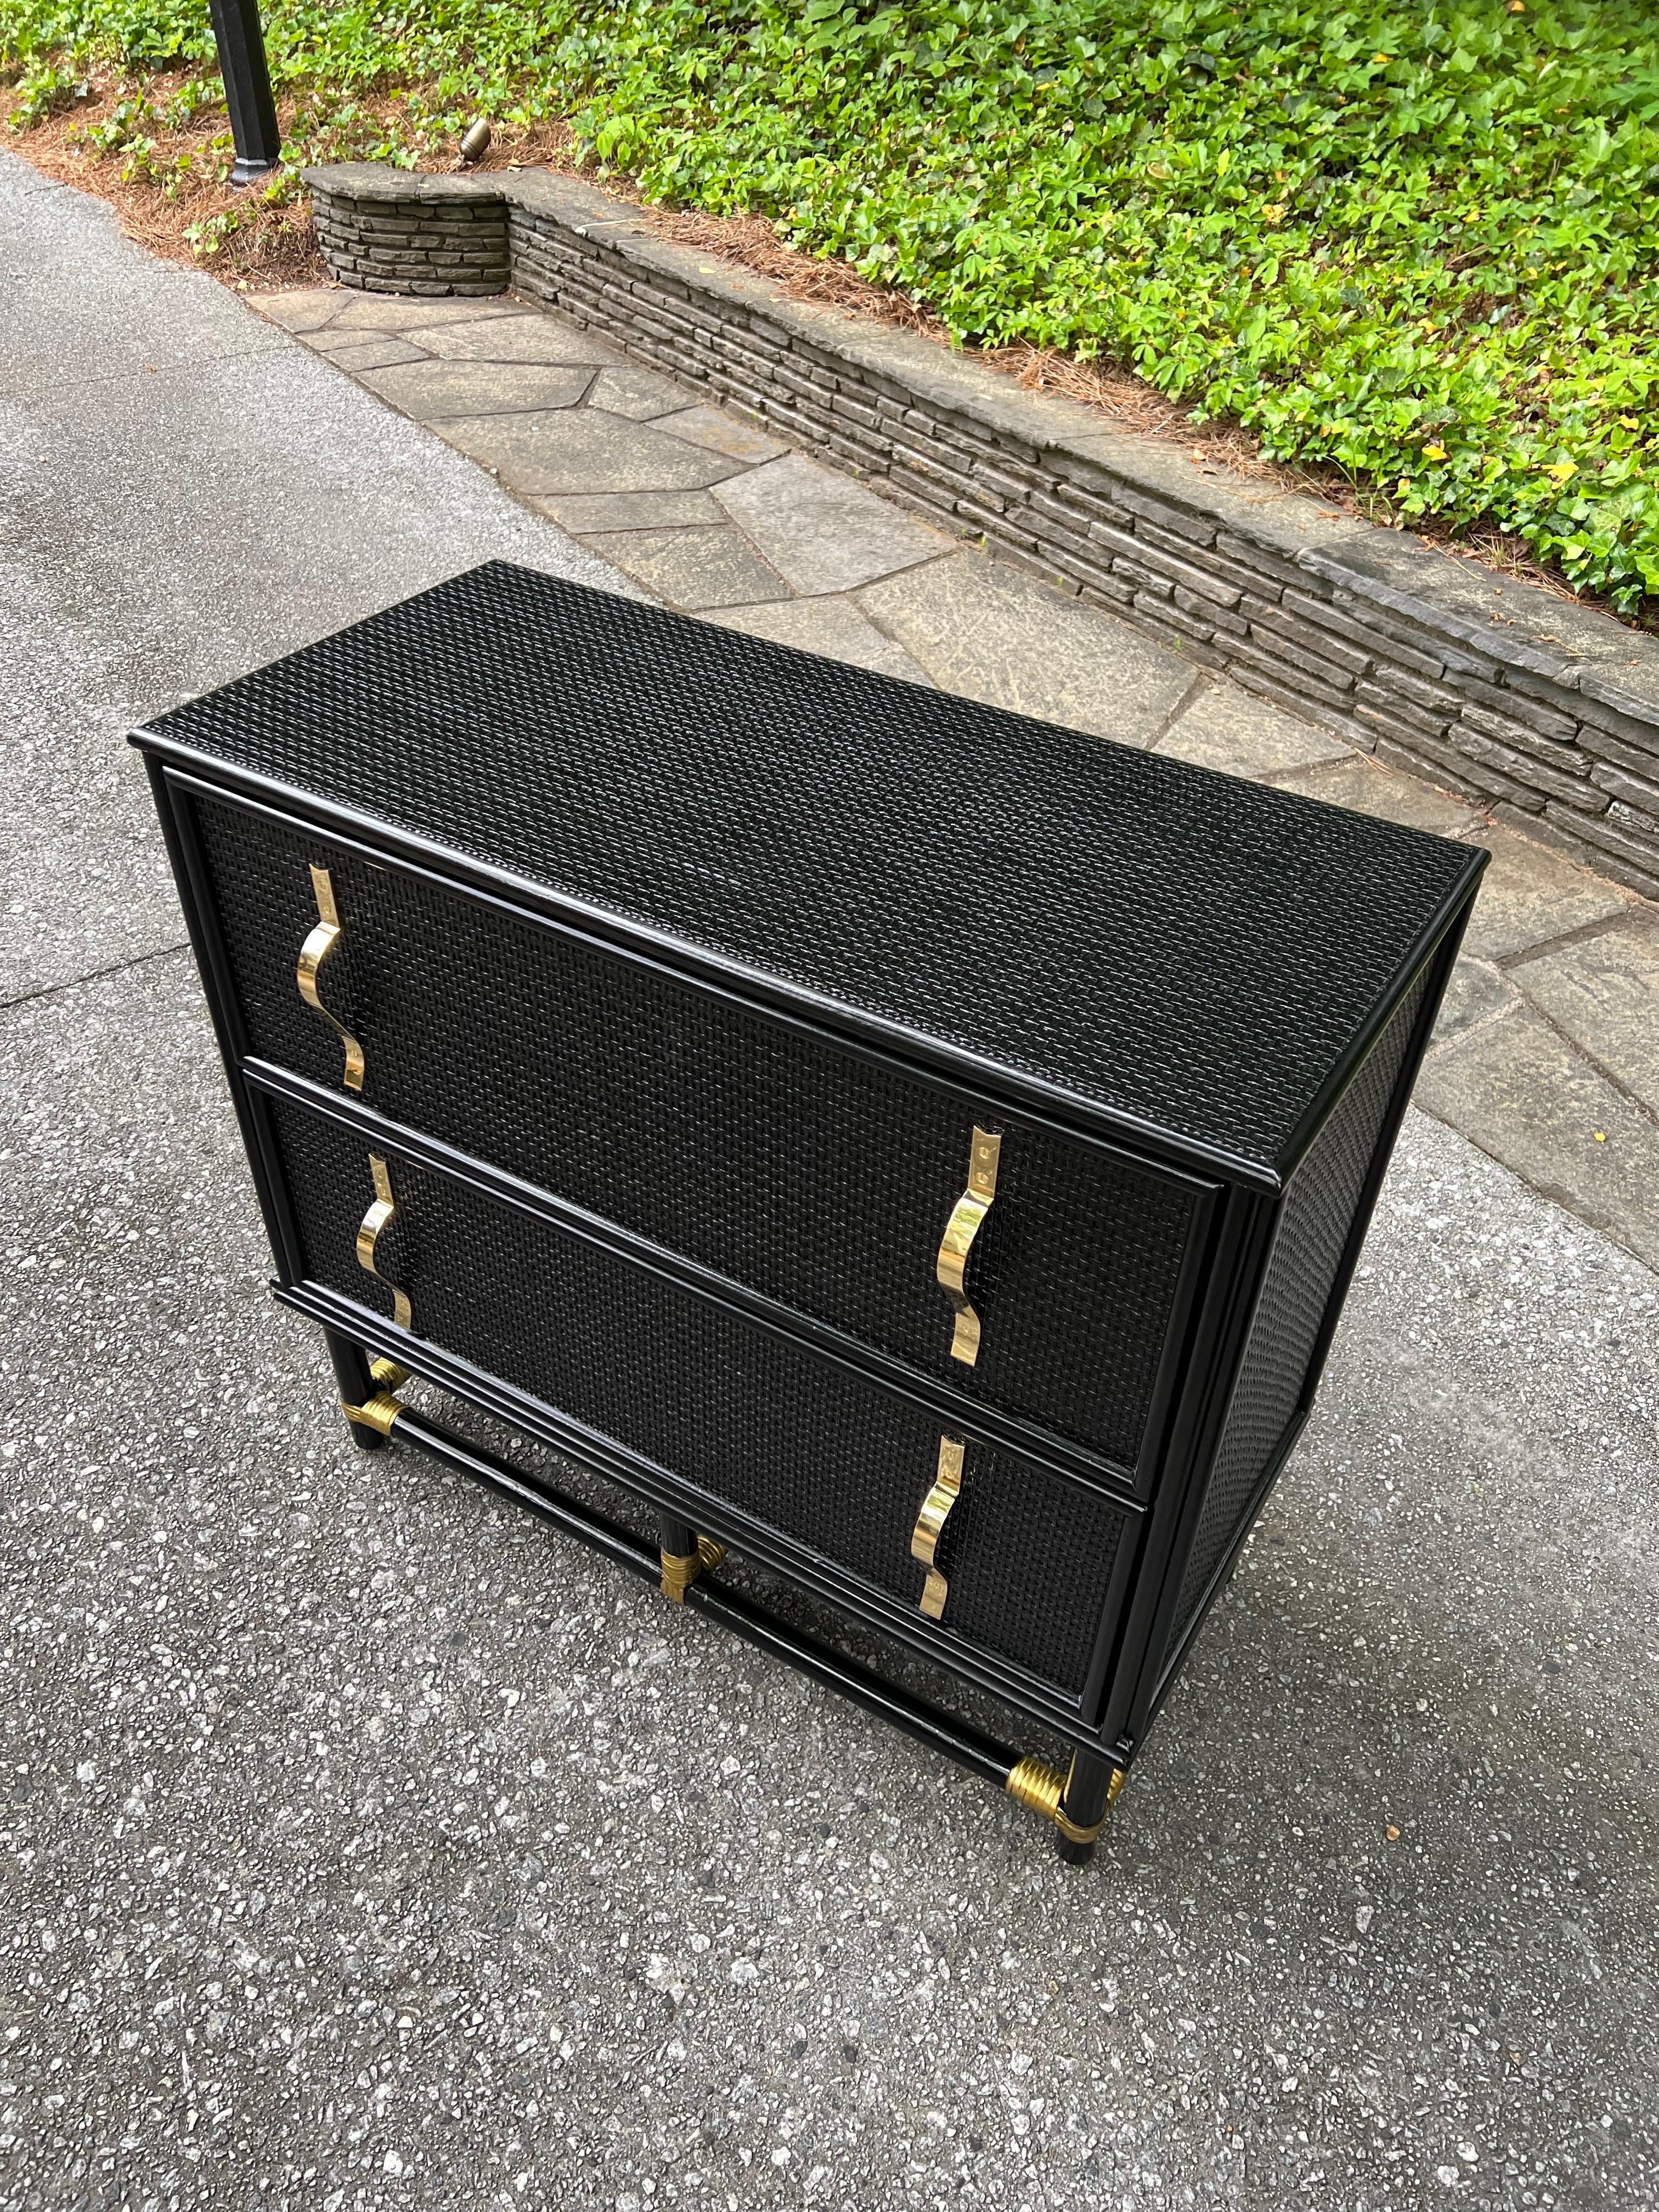 Spectacular Pair of Cane and Brass Doors and Drawers Commodes by Tommi Parzinger For Sale 8